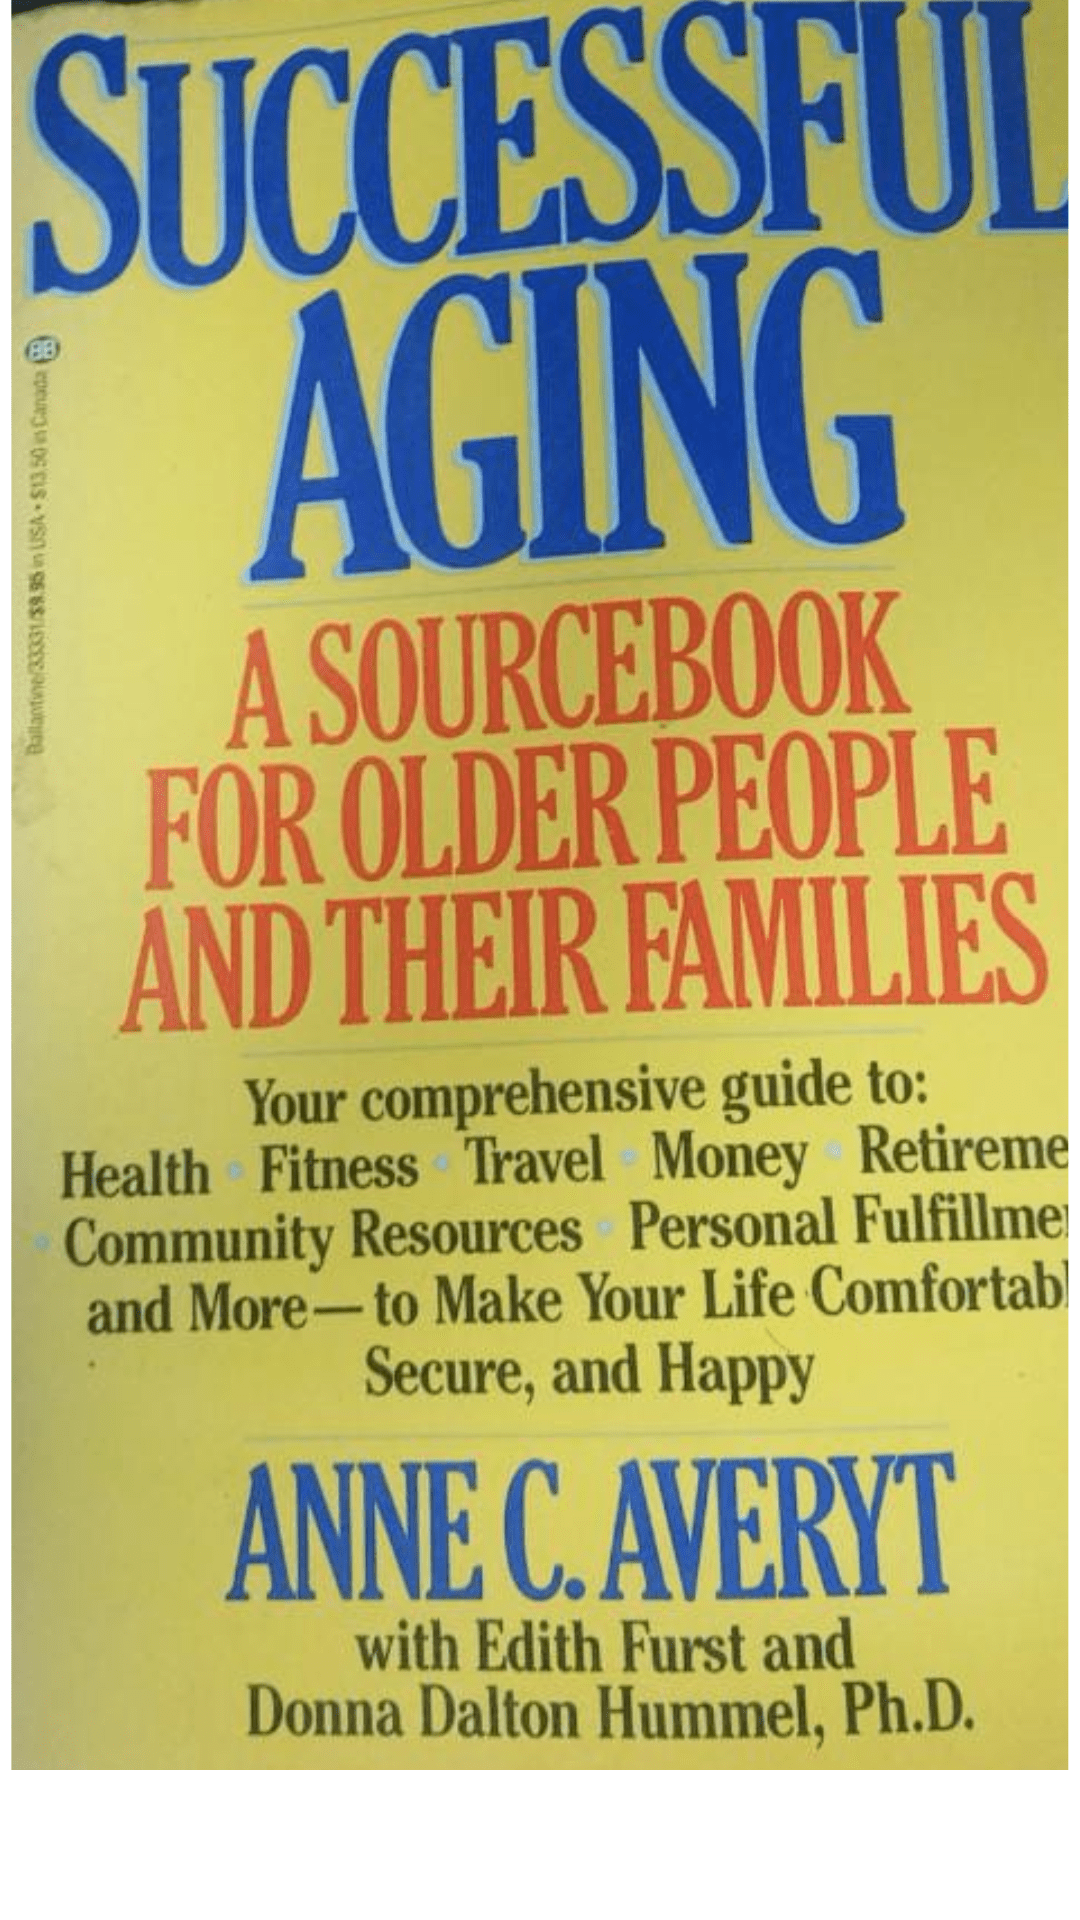 Successful Aging by Anne C. Averyt